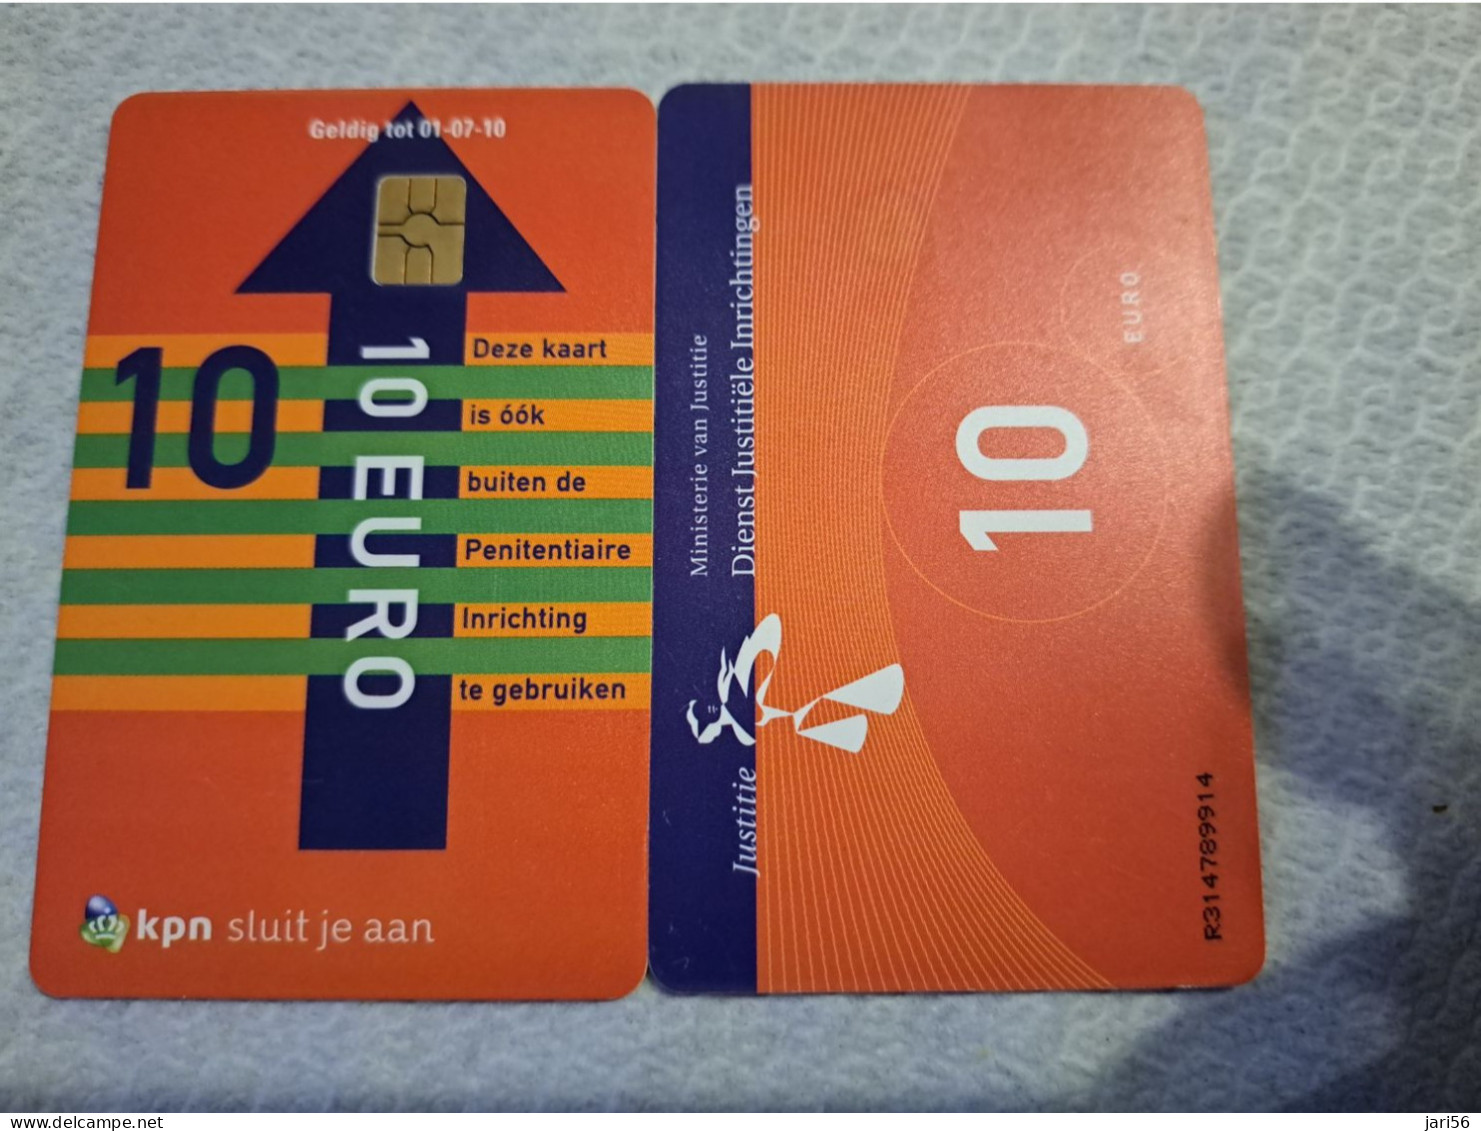 NETHERLANDS   € 10,-   / USED  / DATE  01-07-10  JUSTITIE/PRISON CARD  CHIP CARD/ USED   ** 16163** - Schede GSM, Prepagate E Ricariche